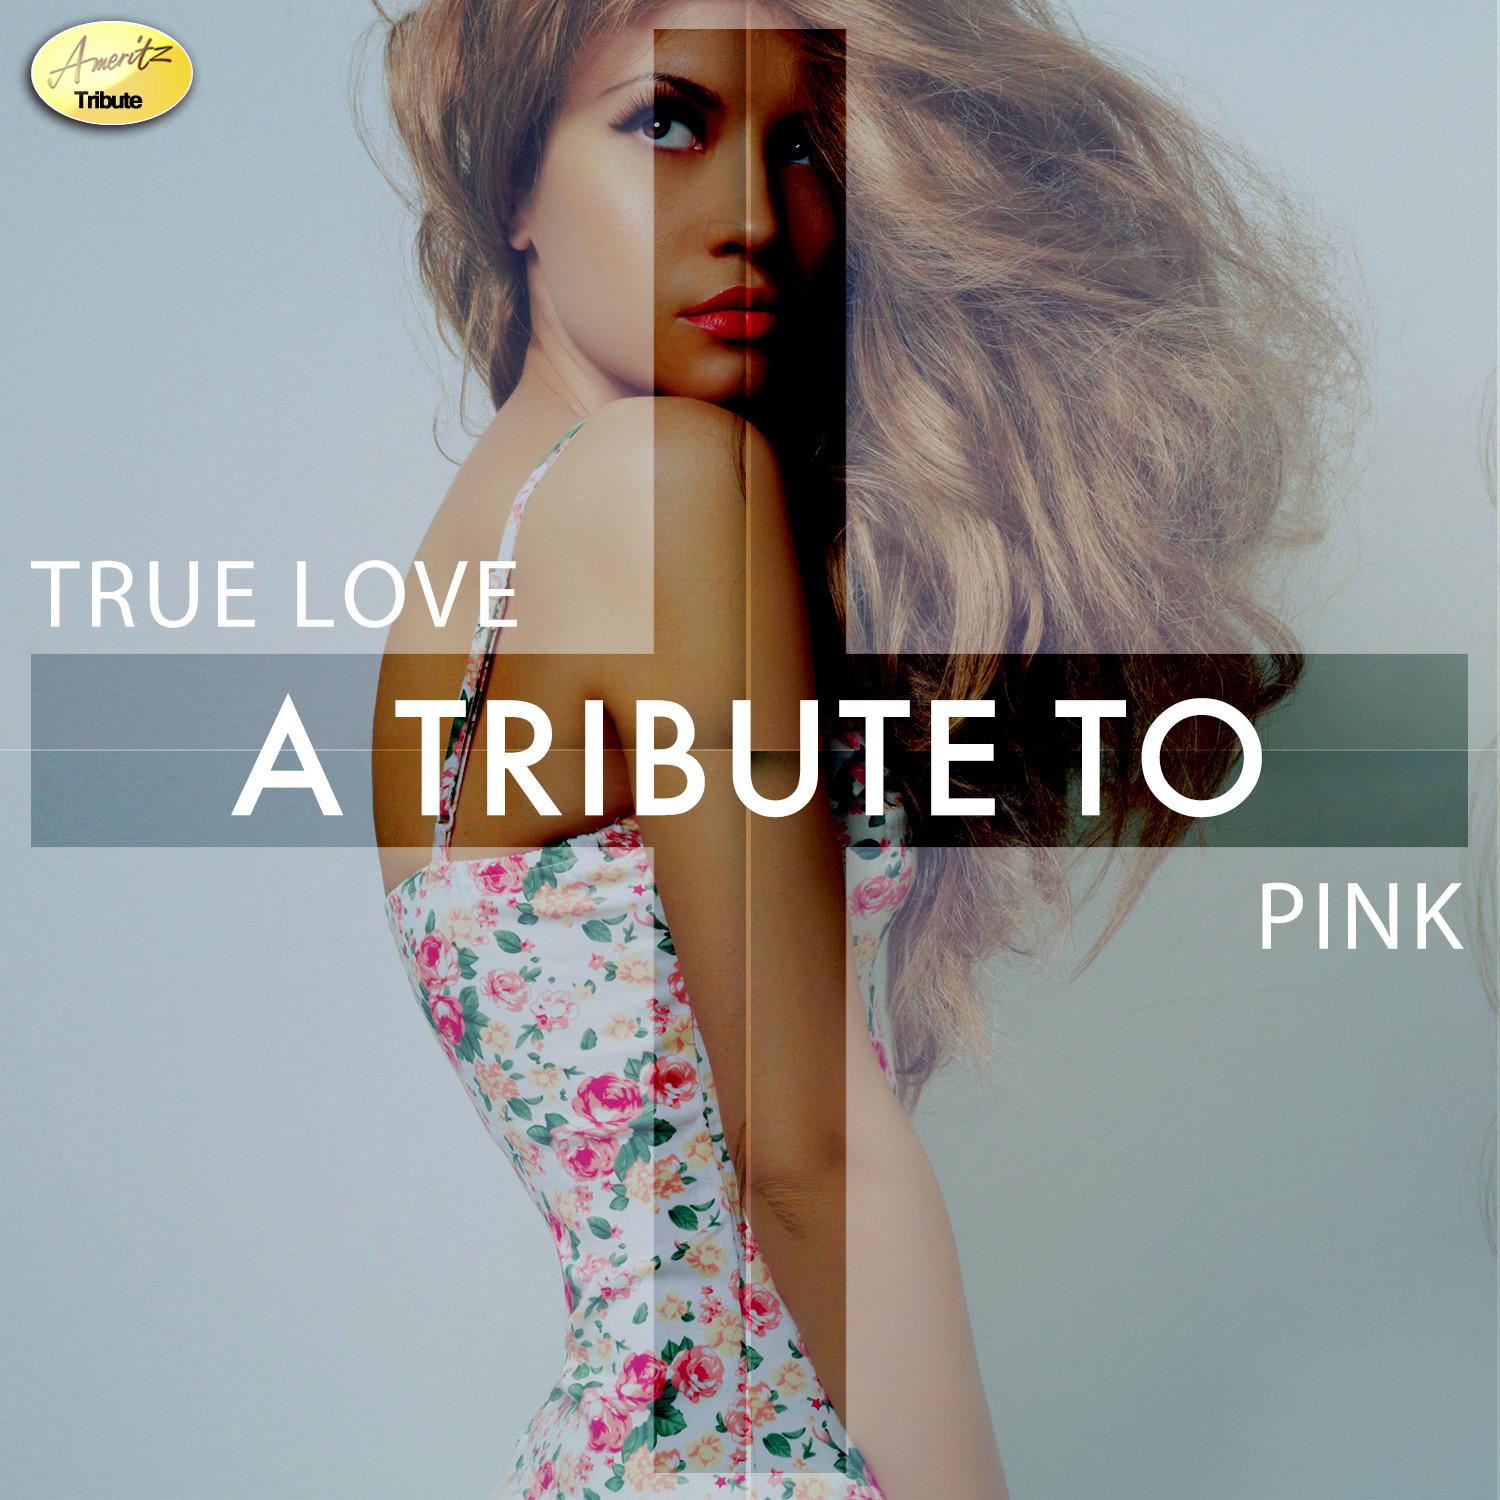 True Love - A Tribute to Pink